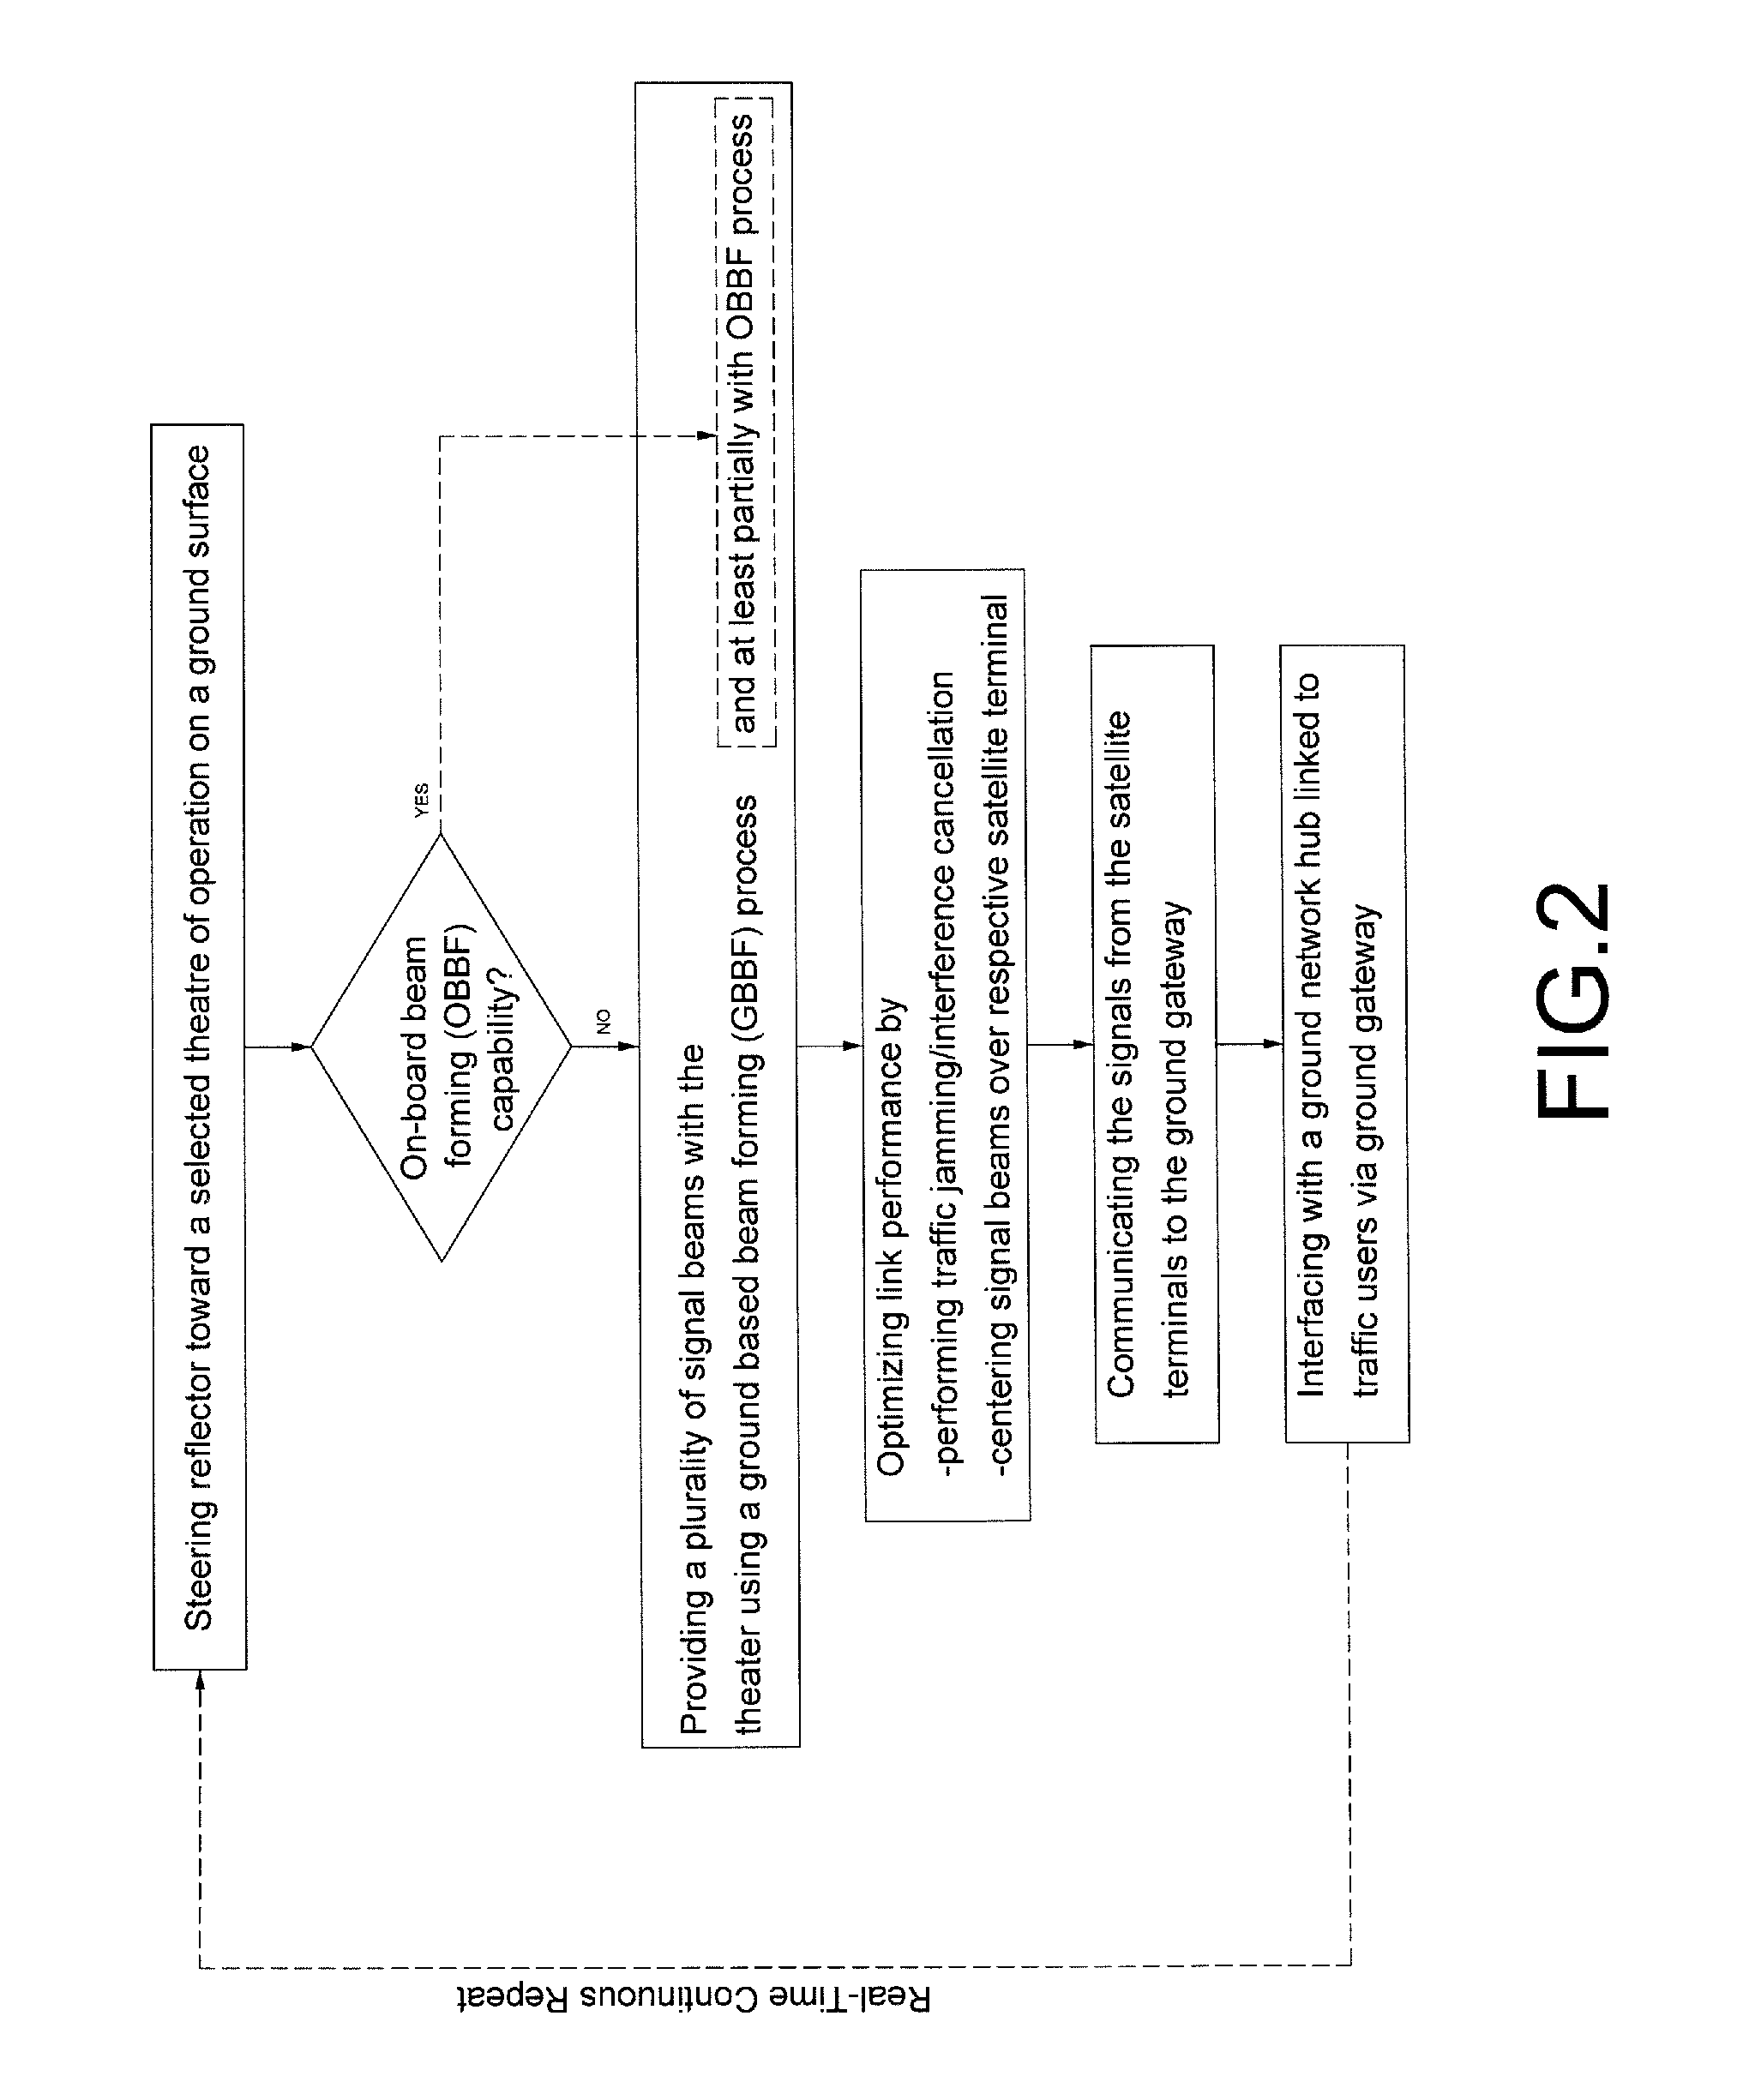 Architecture and method for optimal tracking of multiple broadband satellite terminals in support of in theatre and rapid deployment applications